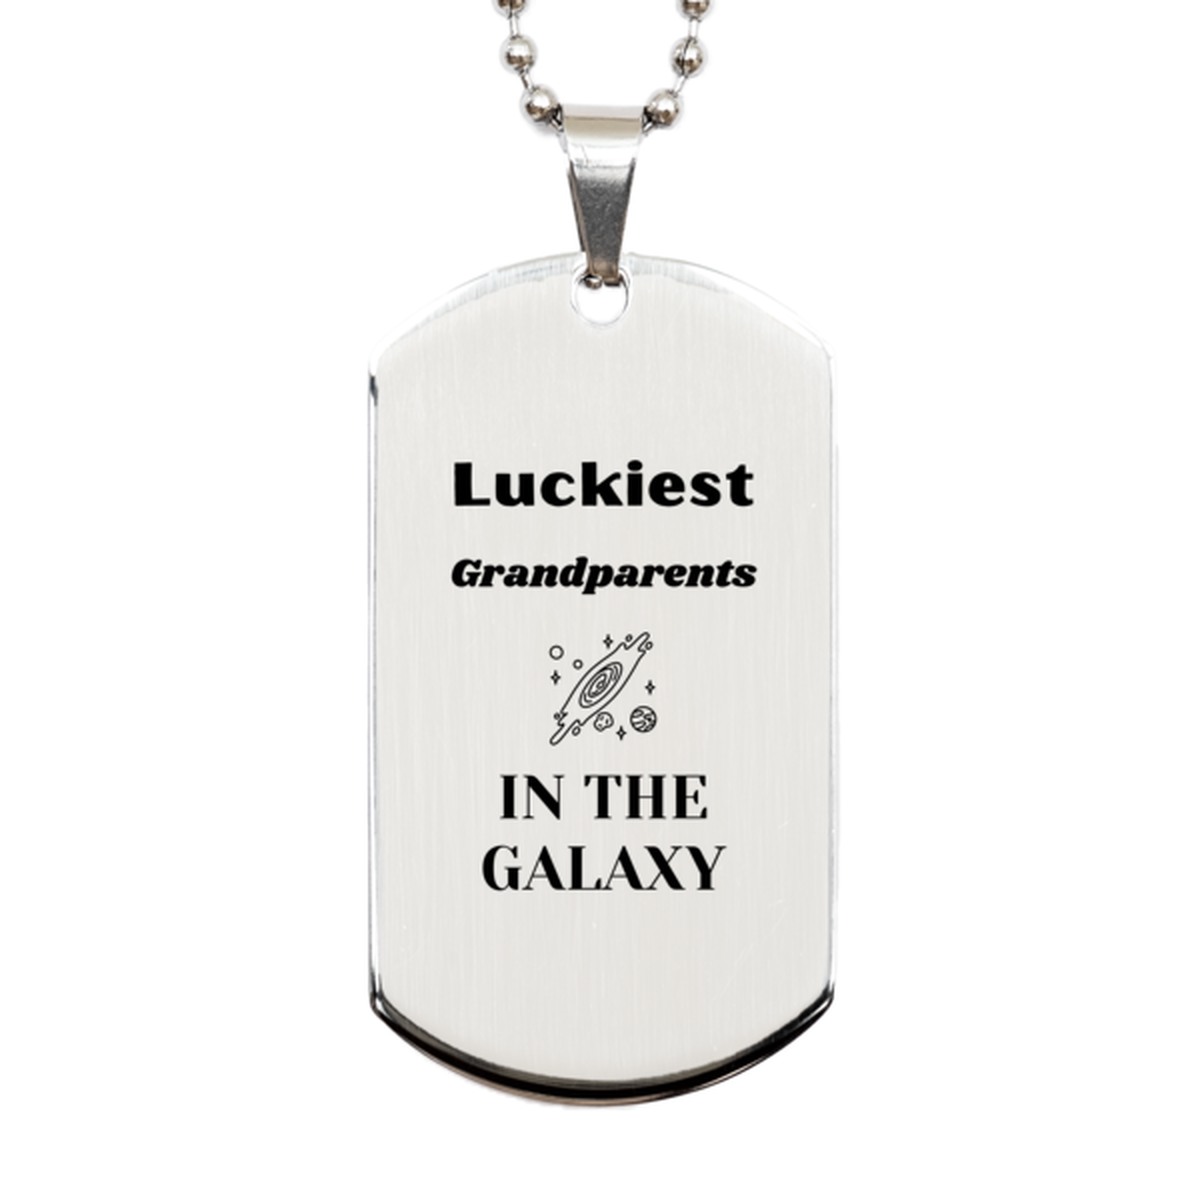 Luckiest Grandparents in the Galaxy, To My Grandparents Engraved Gifts, Christmas Grandparents Silver Dog Tag Gifts, X-mas Birthday Unique Gifts For Grandparents Men Women